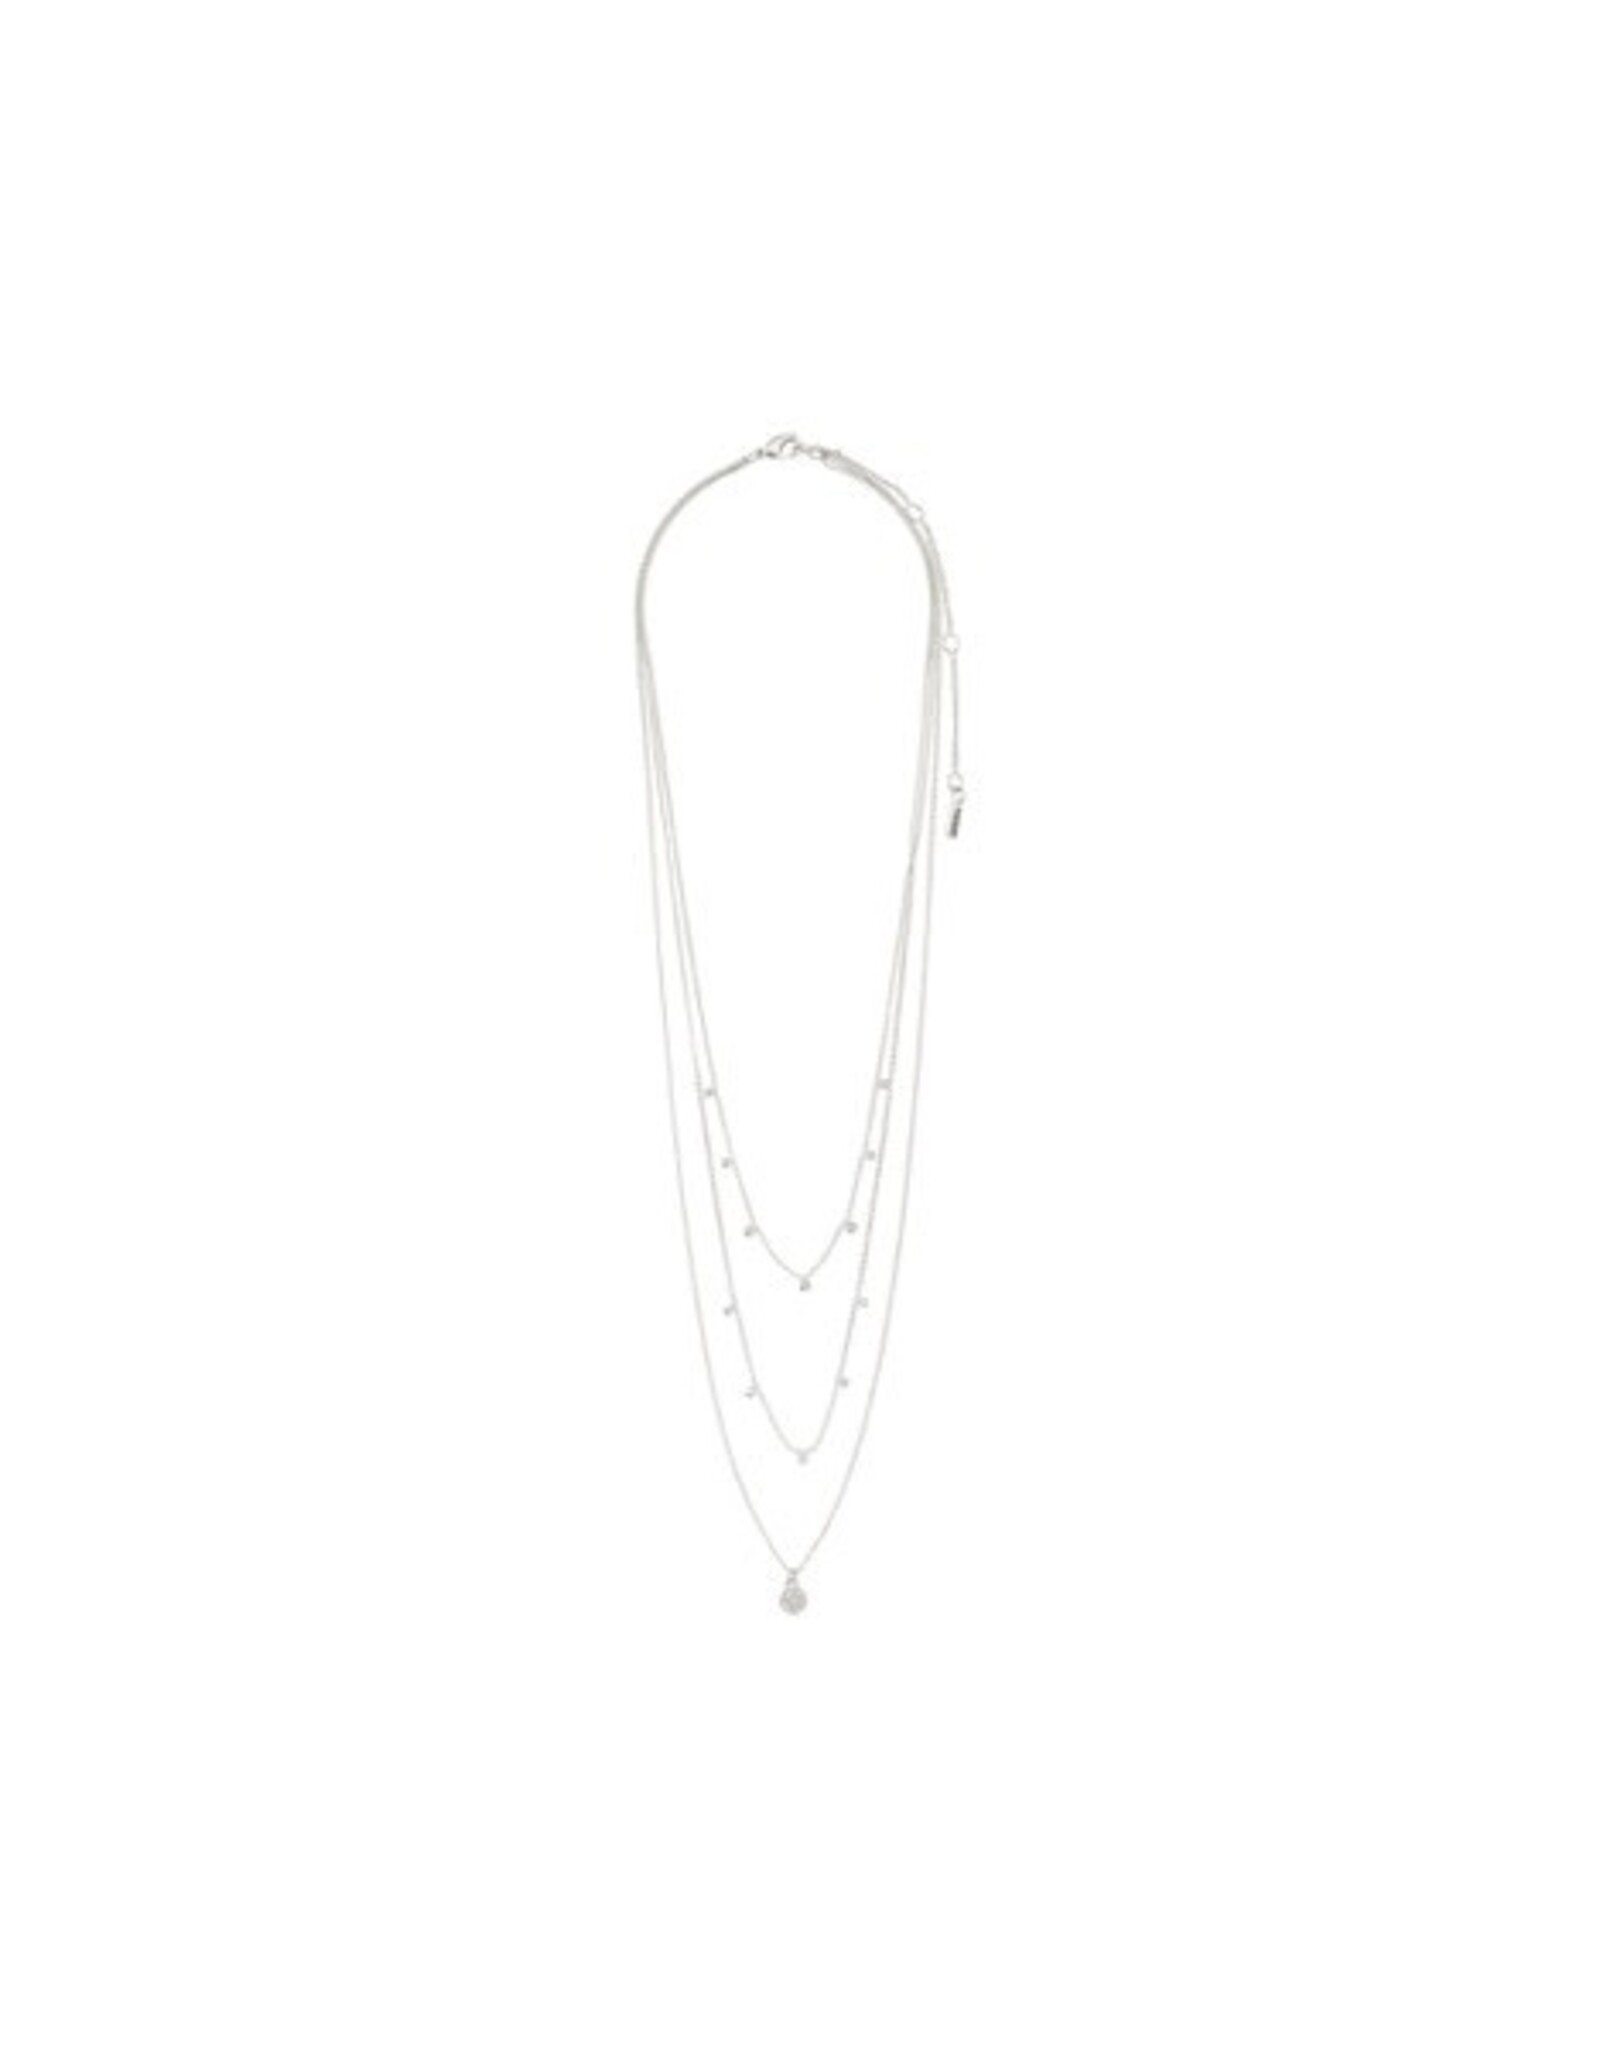 BGS Pilgrim - Chayenne Recycled Necklace / Silver